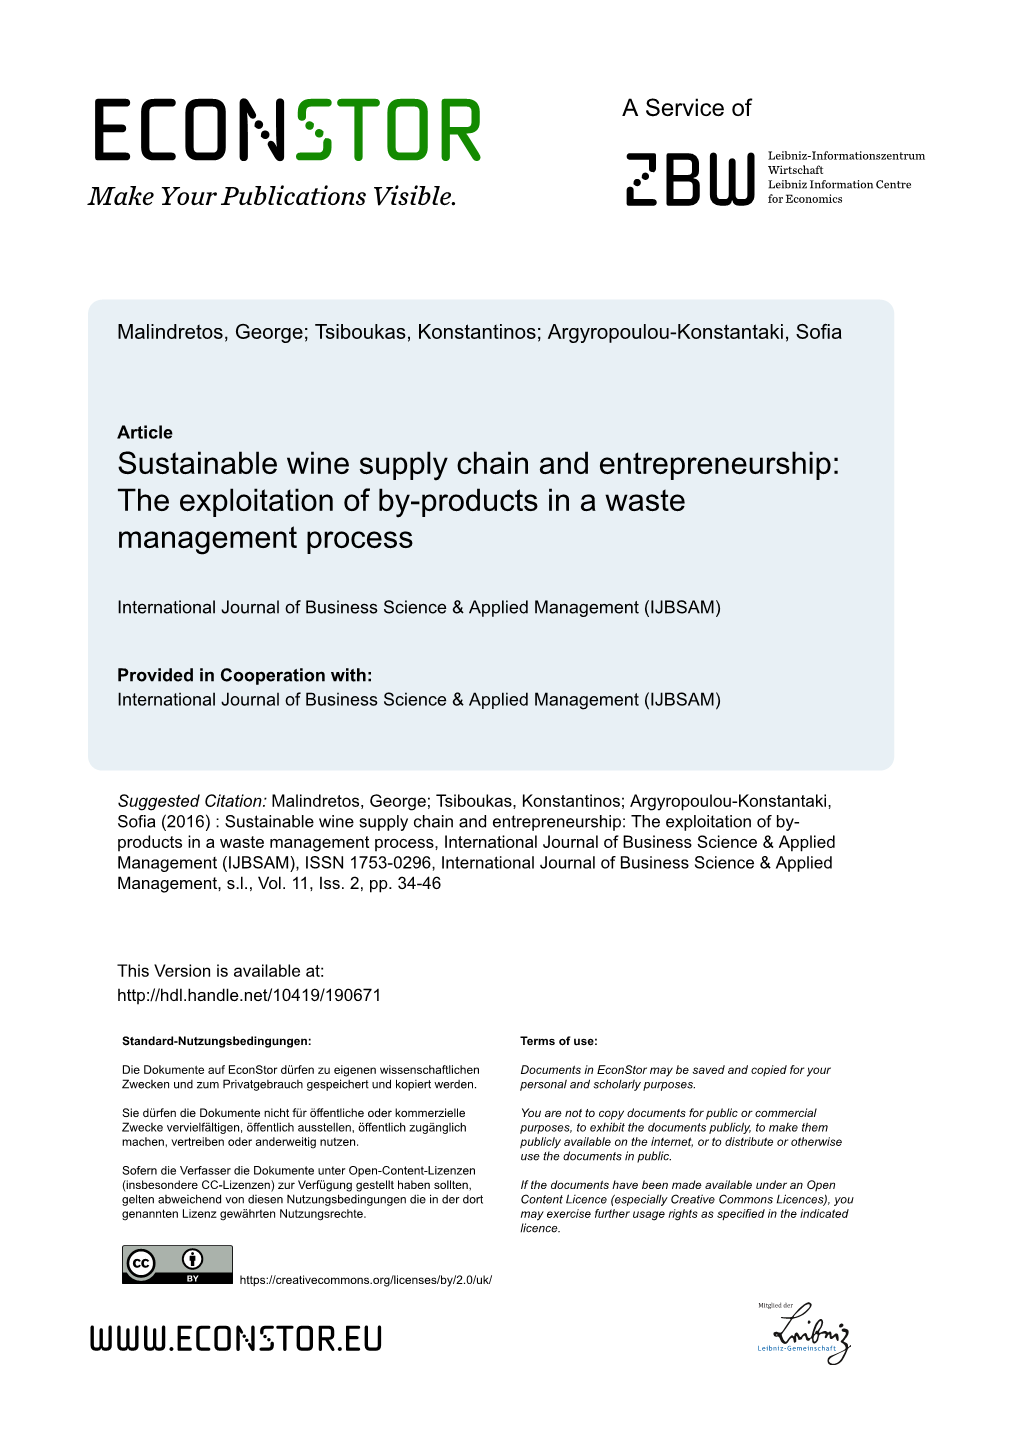 Sustainable Wine Supply Chain and Entrepreneurship: the Exploitation of By-Products in a Waste Management Process